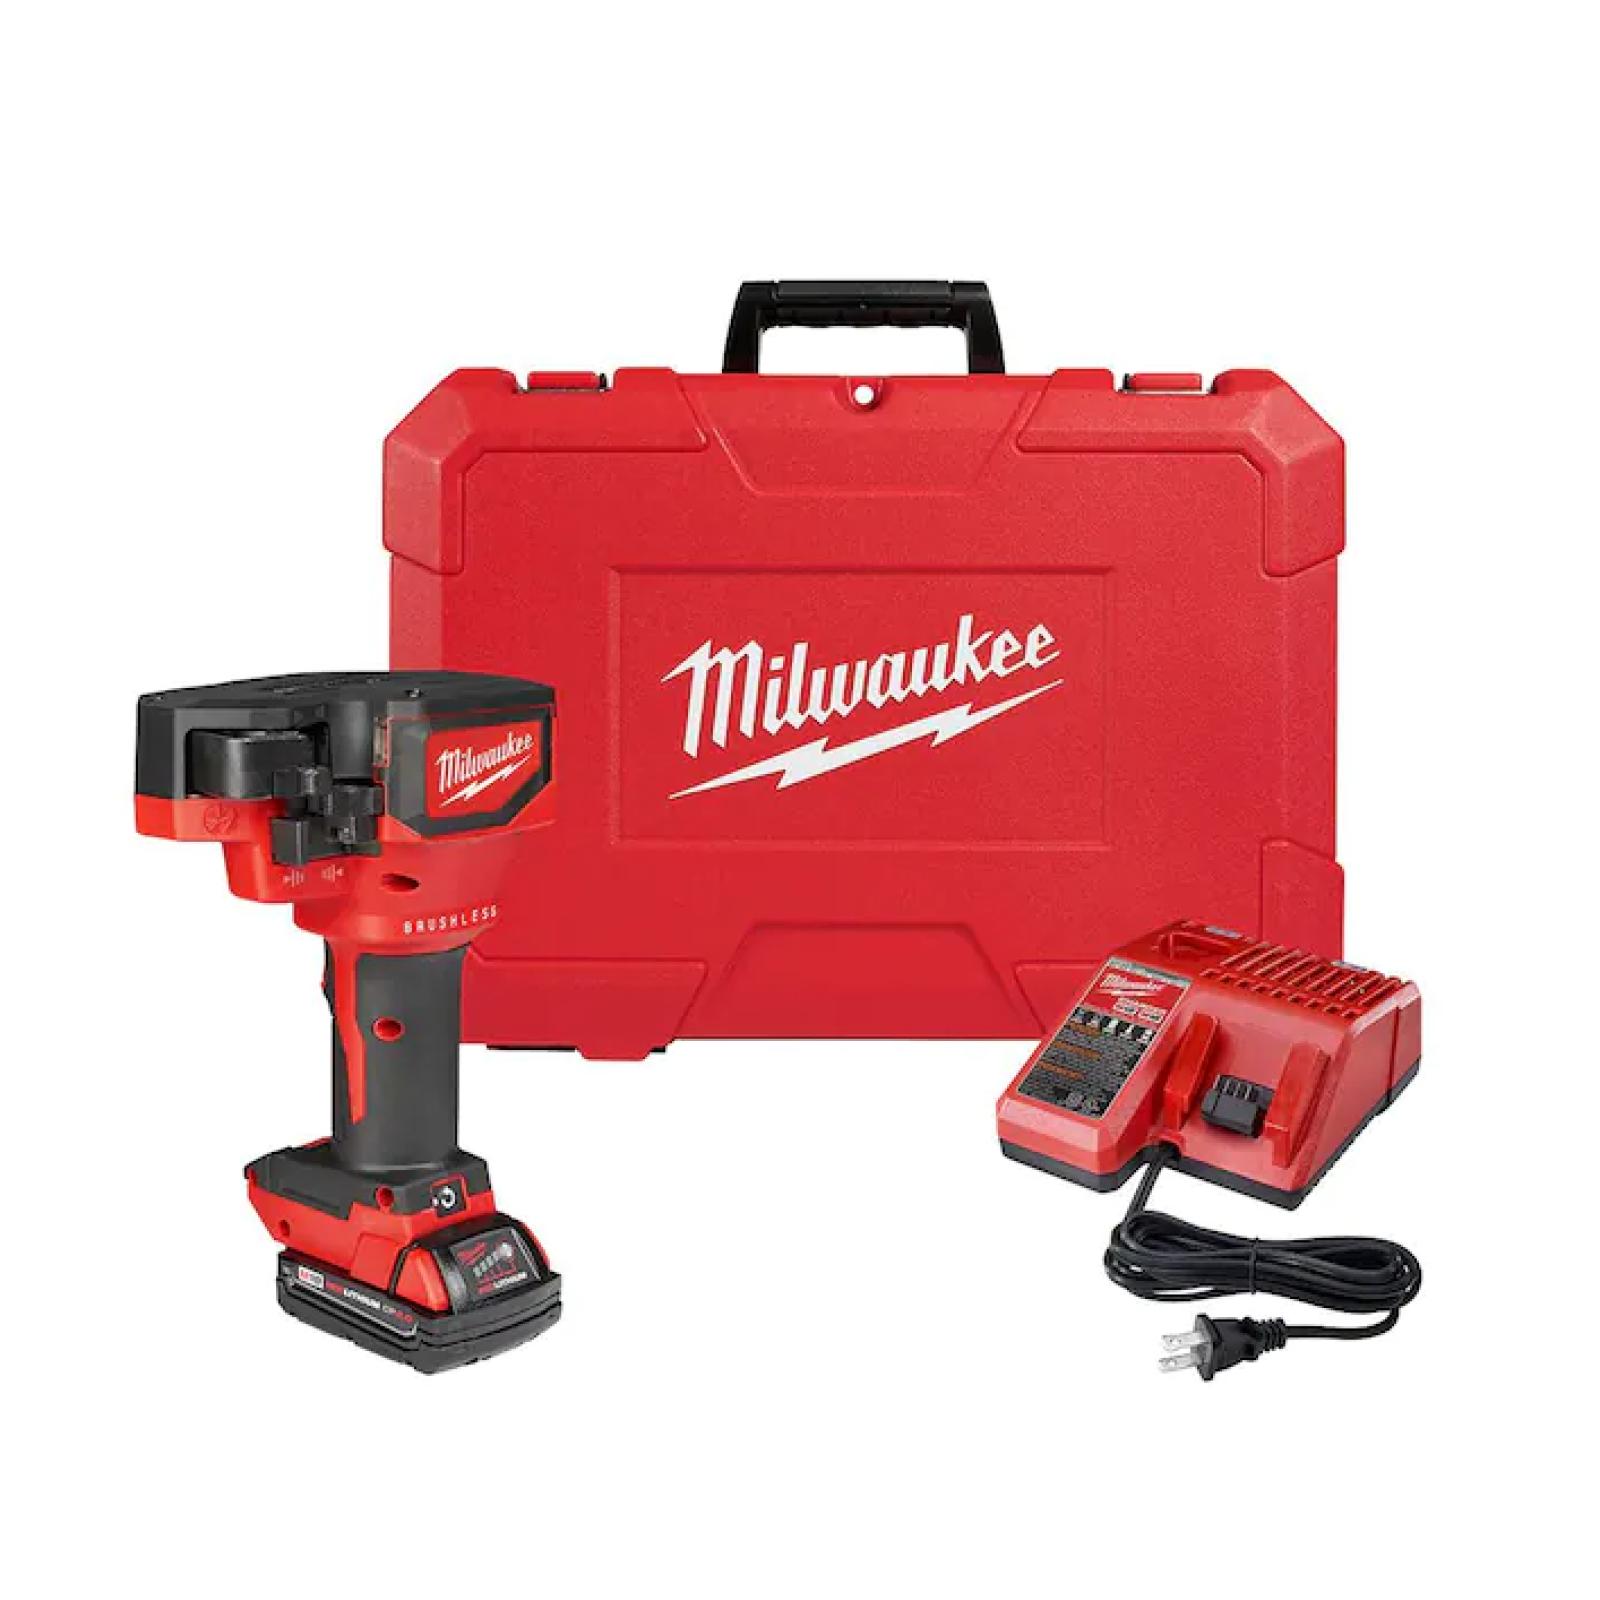 NEW! - Milwaukee M18 18V Lithium-Ion Cordless Brushless Threaded Rod Cutter Kit with 2.0 Ah Battery, Charger and Case